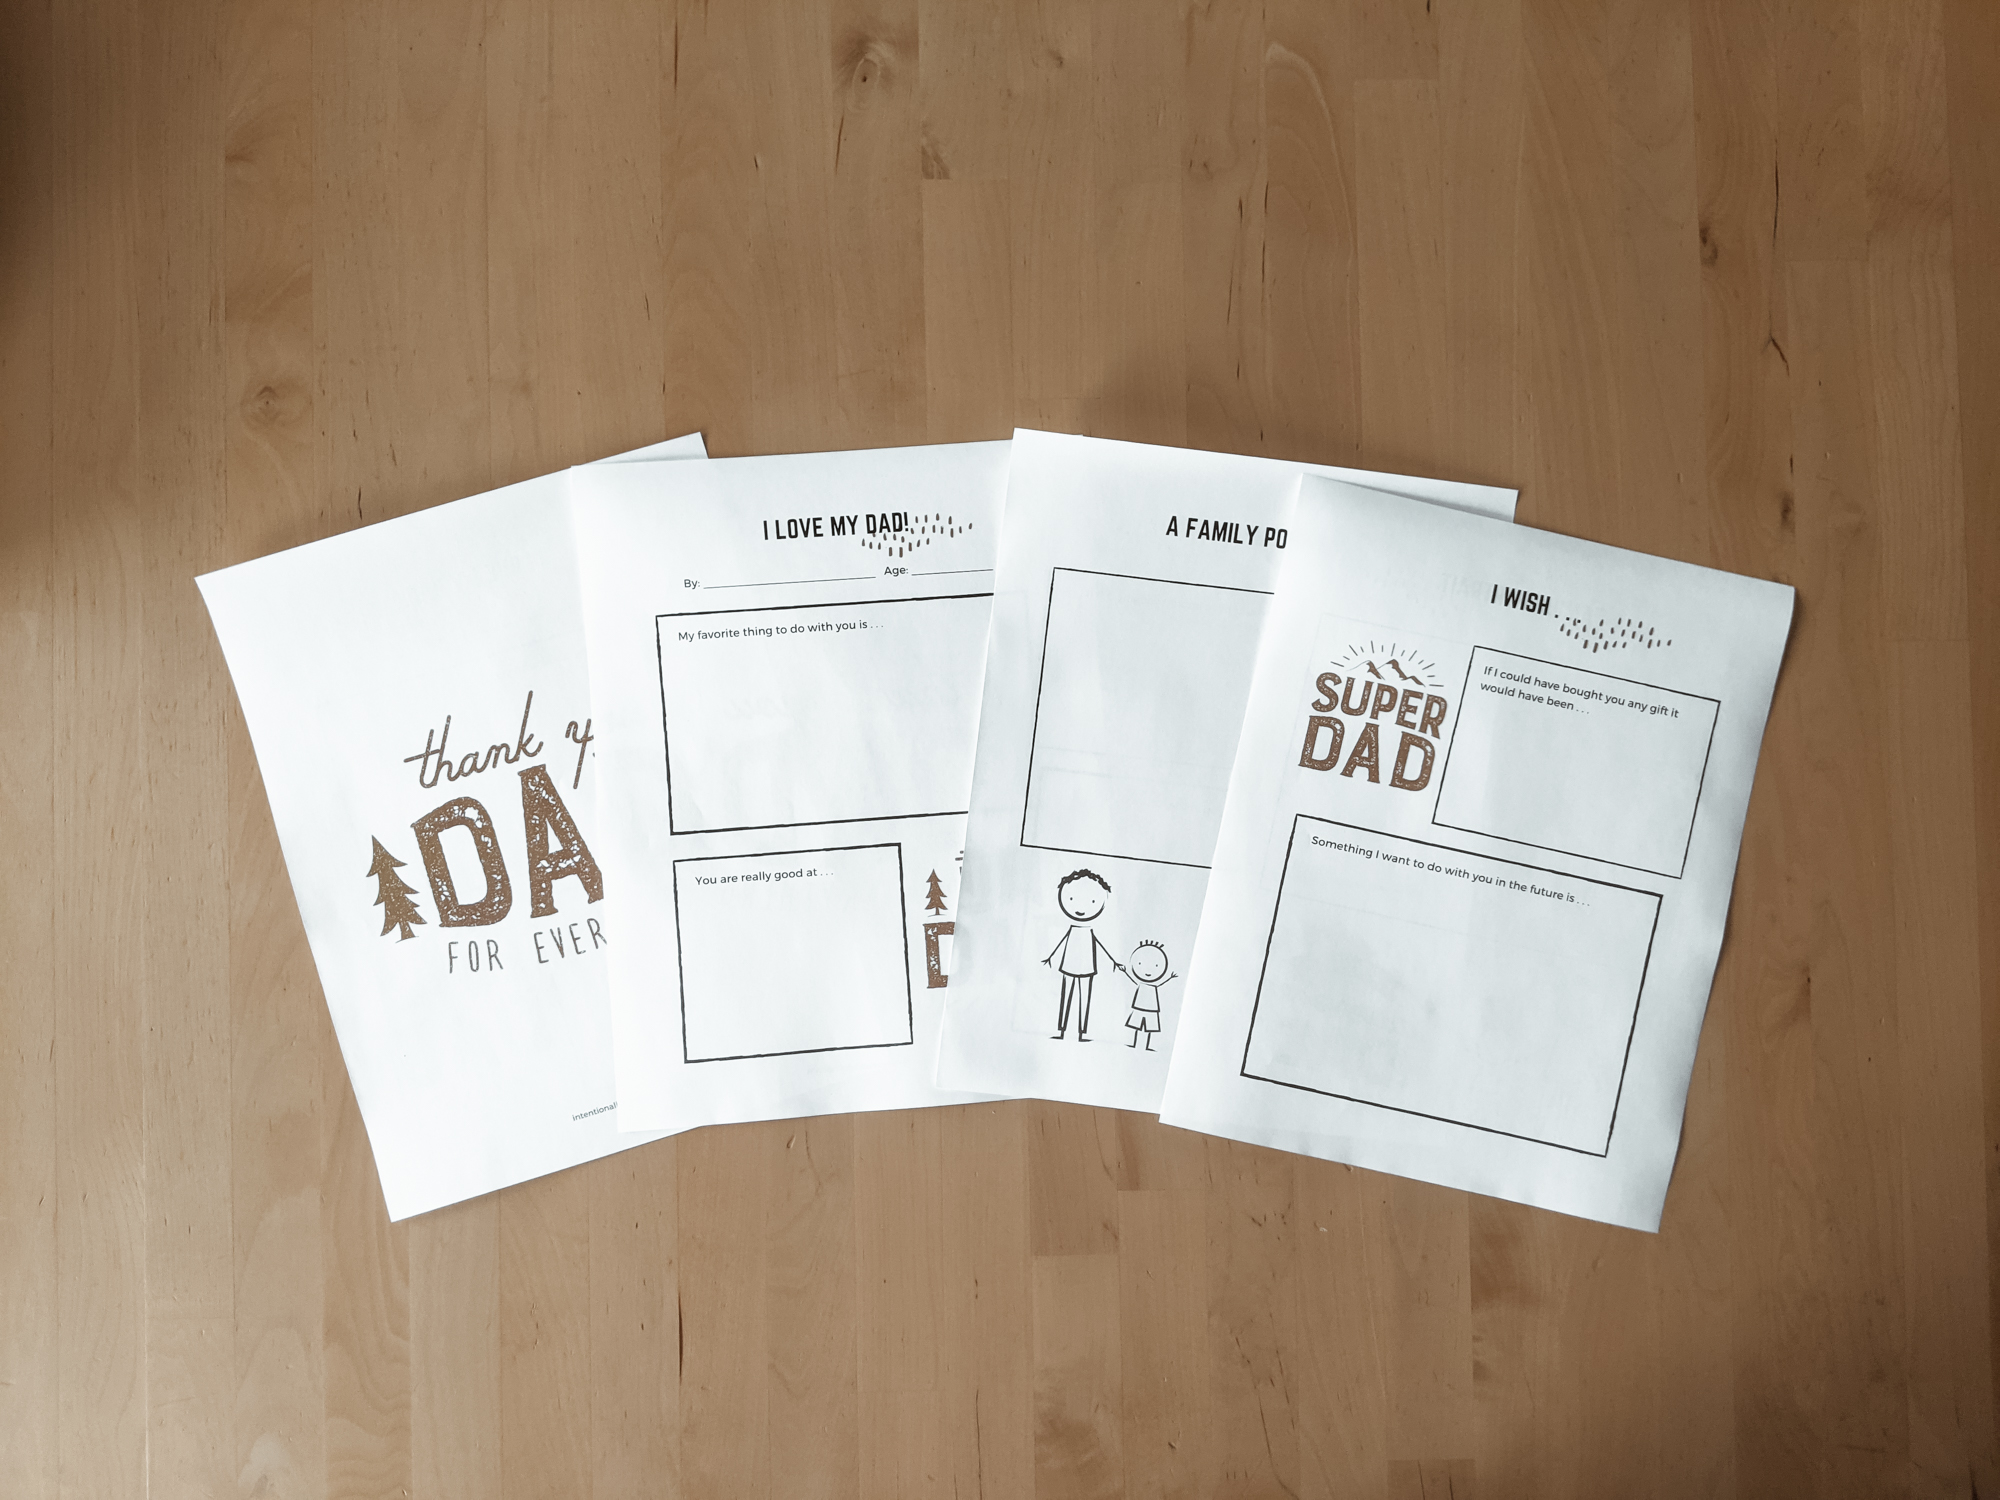 Free Father's Day Printable for Kids to fill out - great for older kids